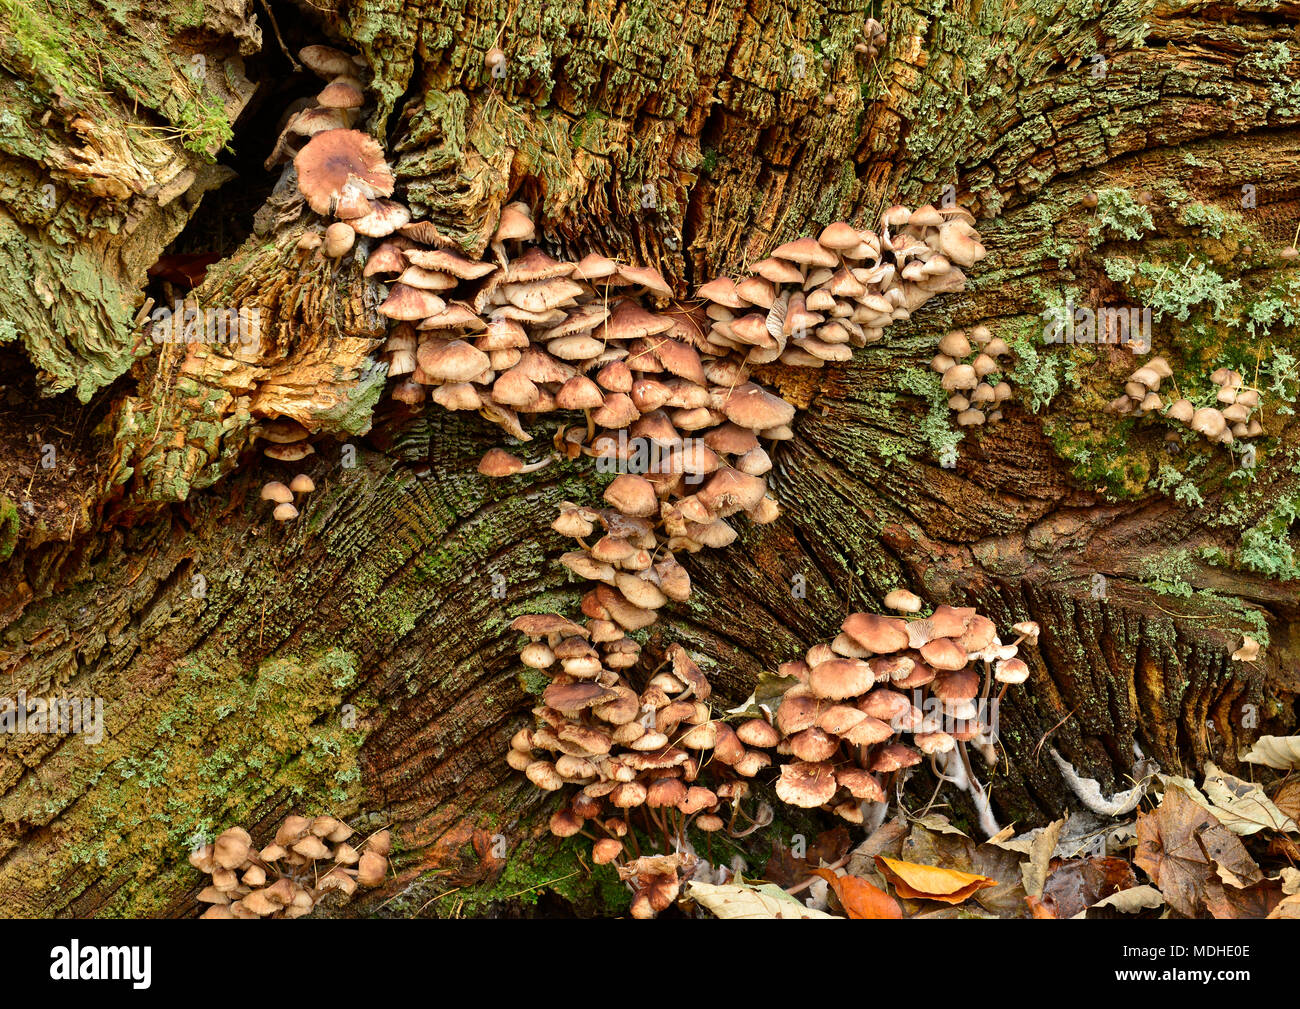 Fungus on the end of a tree stump, Bolam Lake; Belsay, Northumberland, England Stock Photo